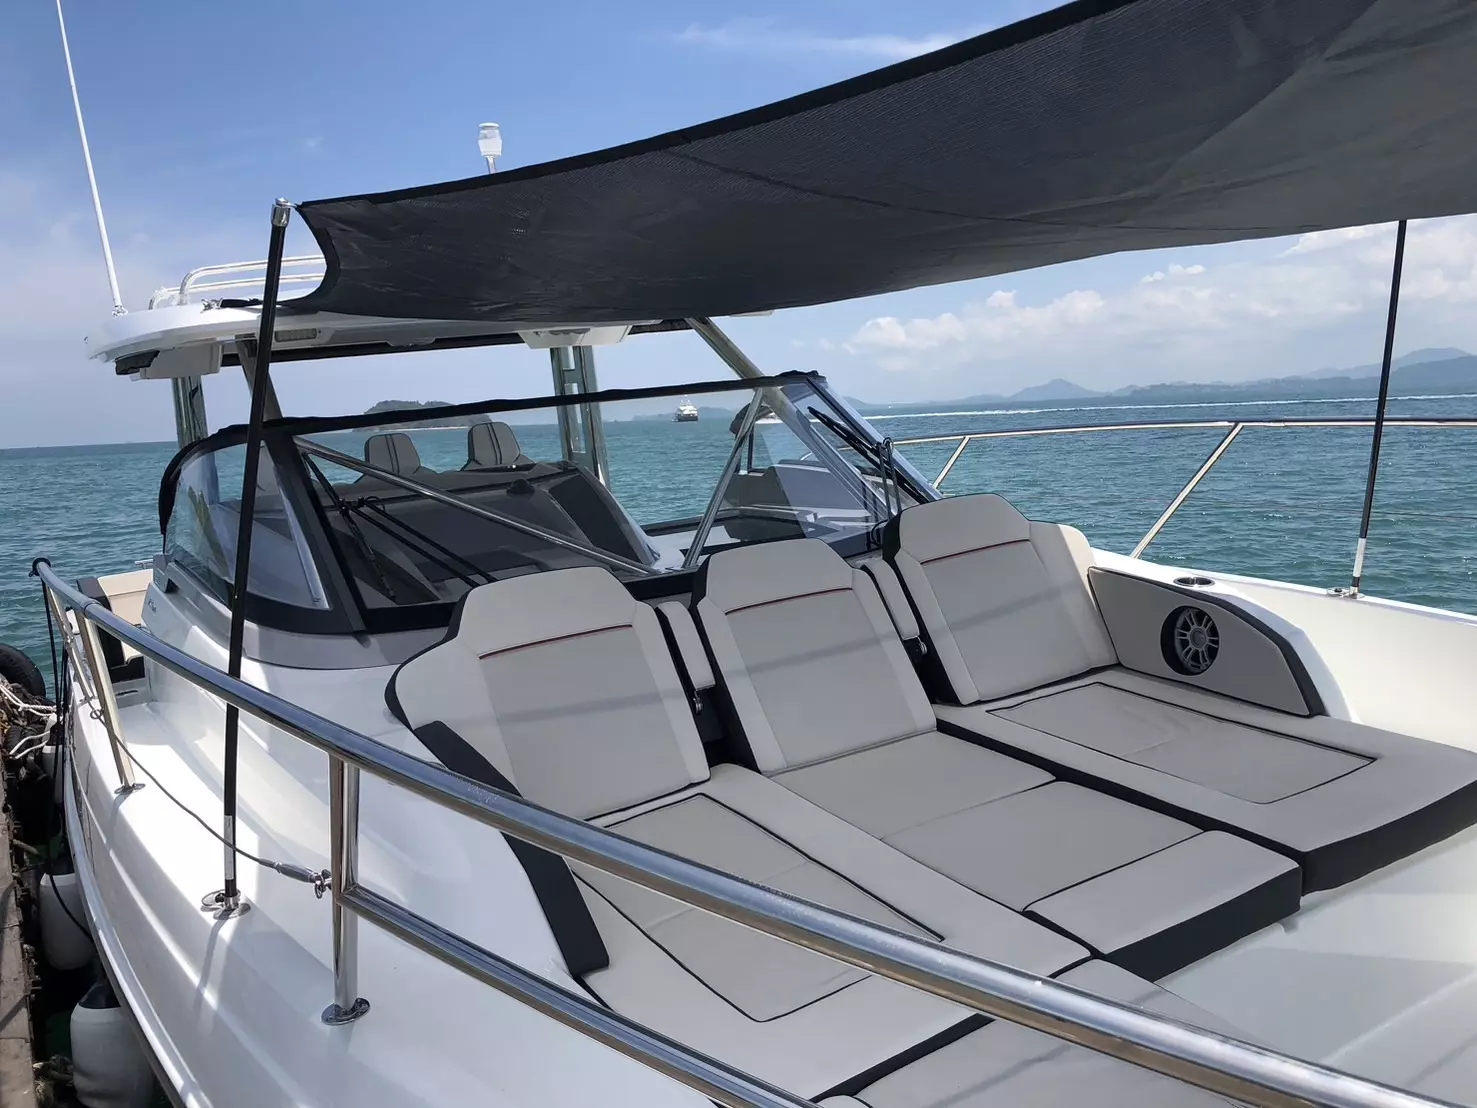 NaNea by Jeanneau - Special Offer for a private Power Boat Rental in Koh Samui with a crew